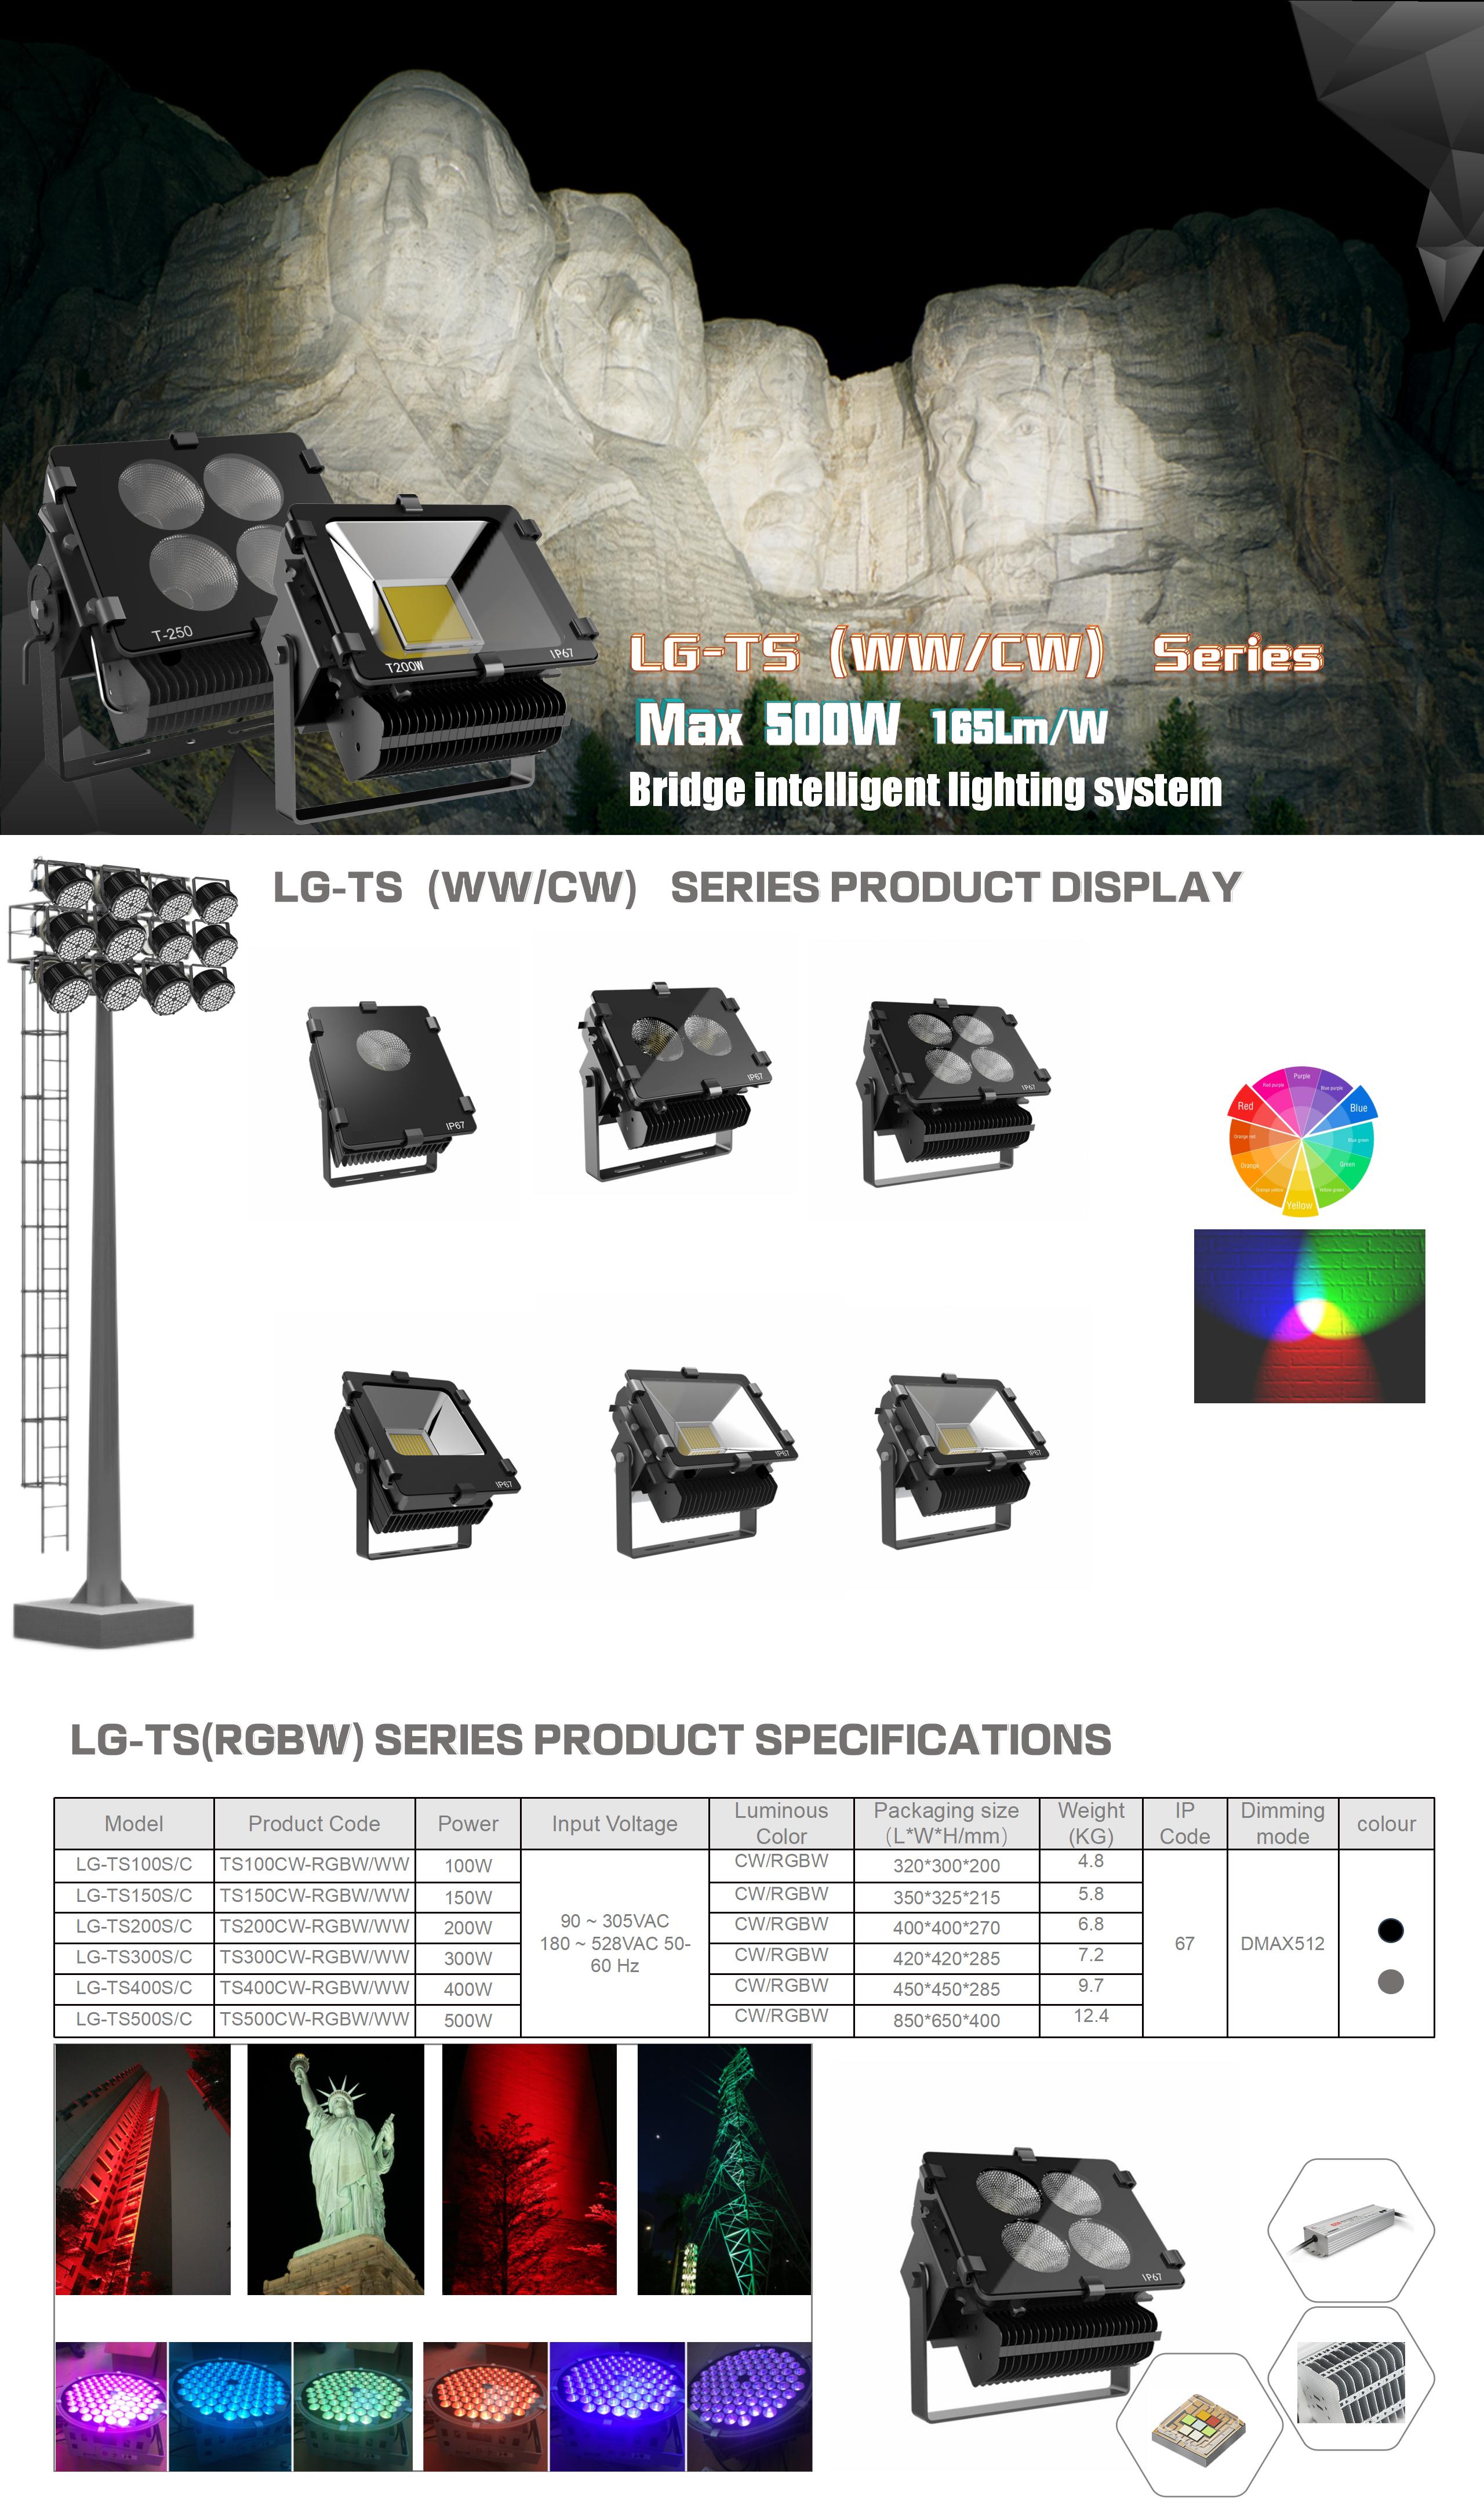 TS series multi-point optical stadium lights (CREE SMD LED) LG-TS100W-SYN/Y(N:Non-dimming control Y: